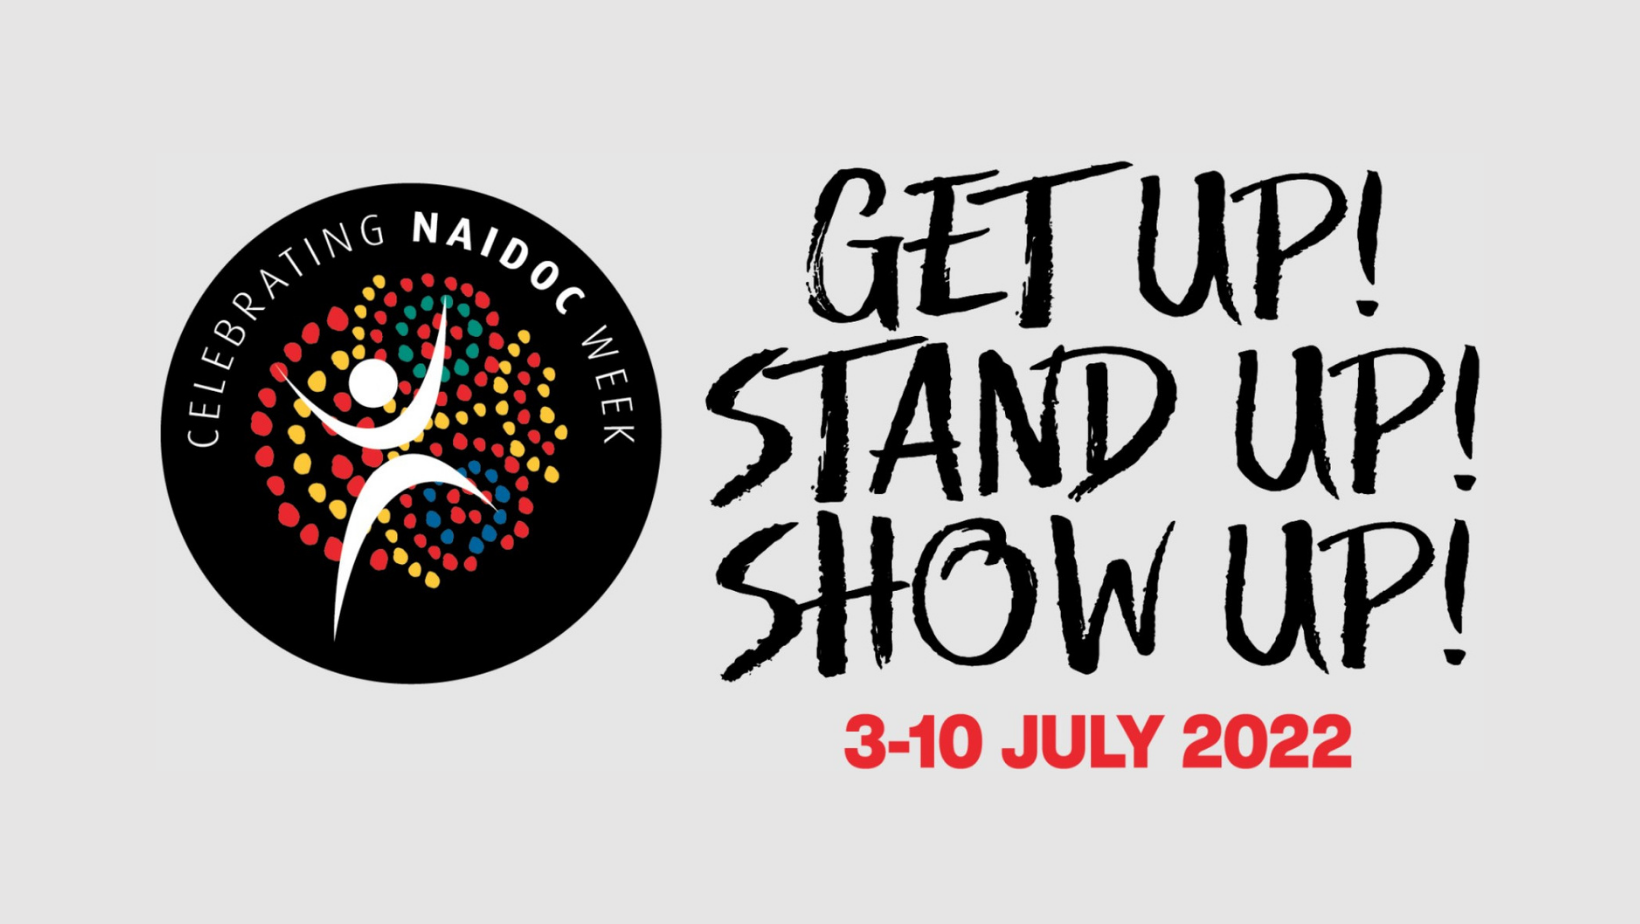 NAIDOC Week (June 3-10): Get Up! Stand Up! Show Up!